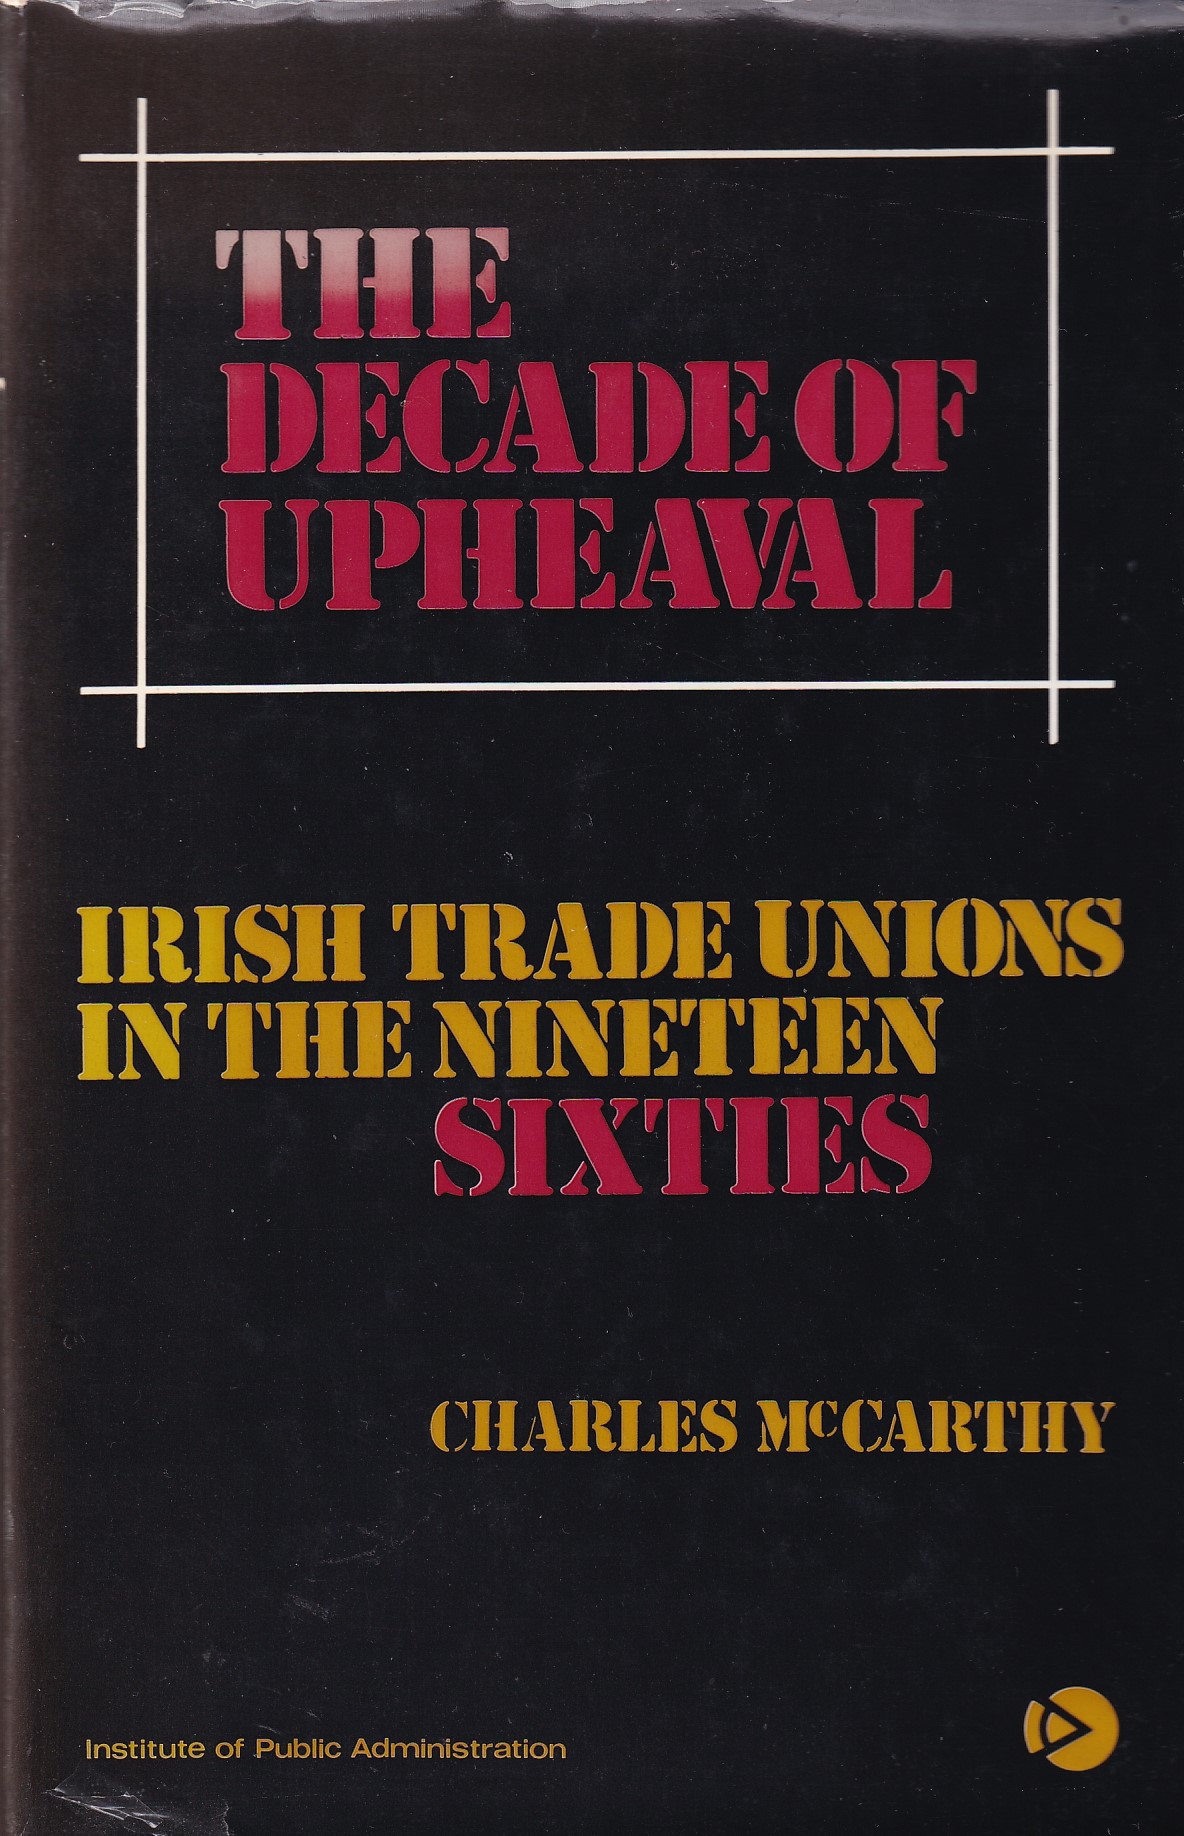 Decade of Upheaval: Irish Trade Unions in the Nineteen Sixties | Charles McCarthy | Charlie Byrne's